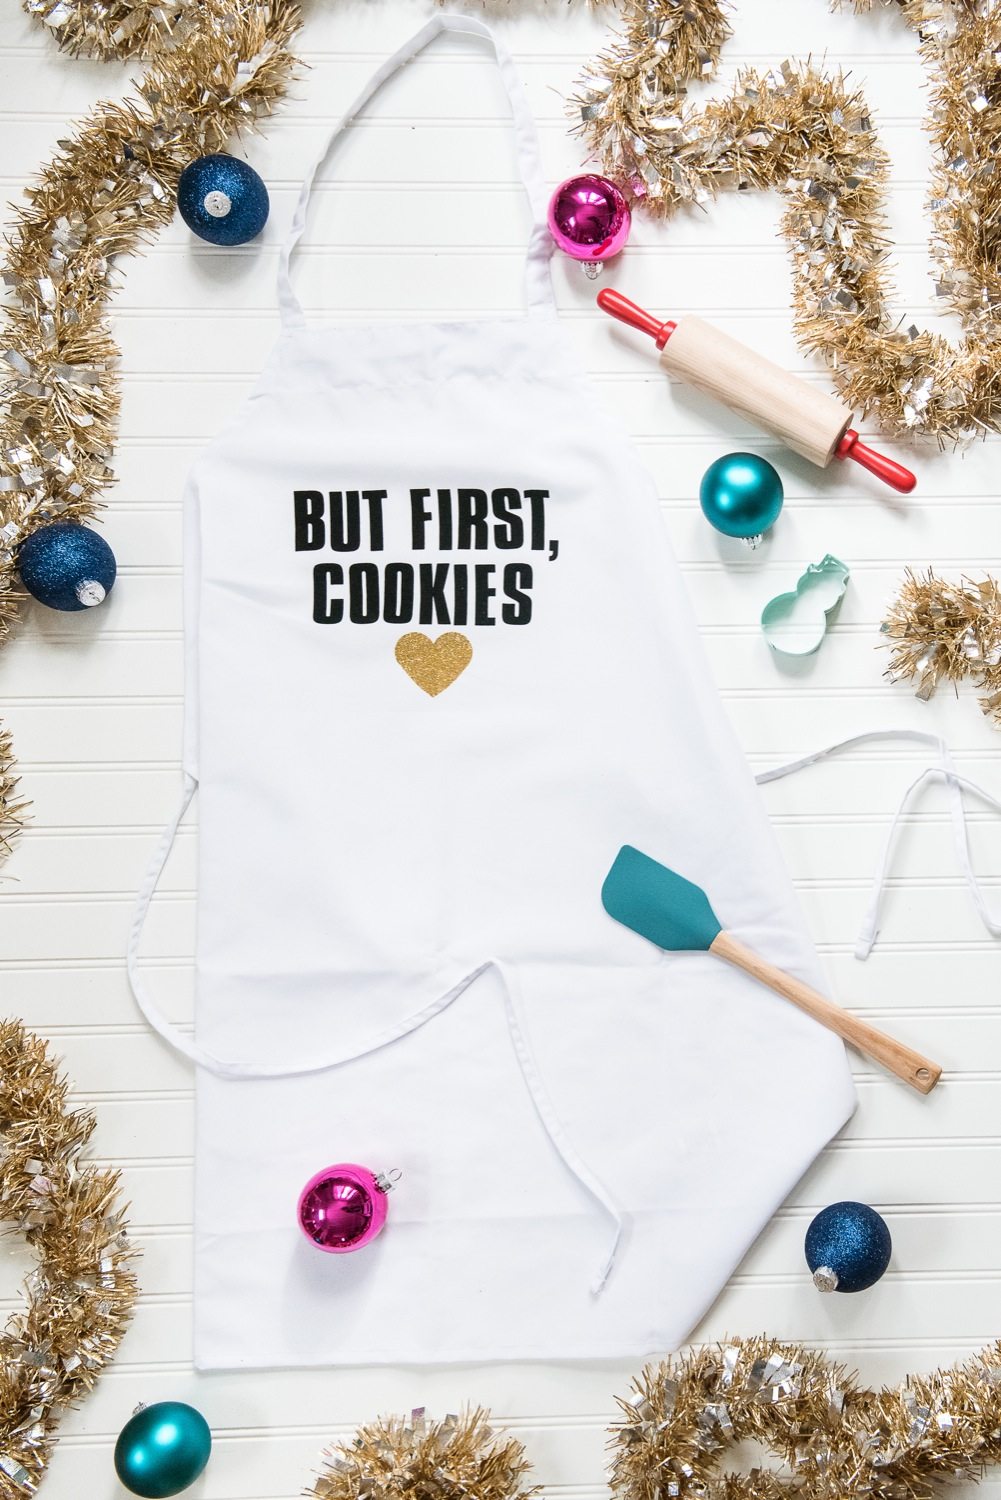 DIY Graphic Aprons from @cydconverse | Hostess gift ideas, DIY gifts, homemade gifts, entertaining ideas and more!